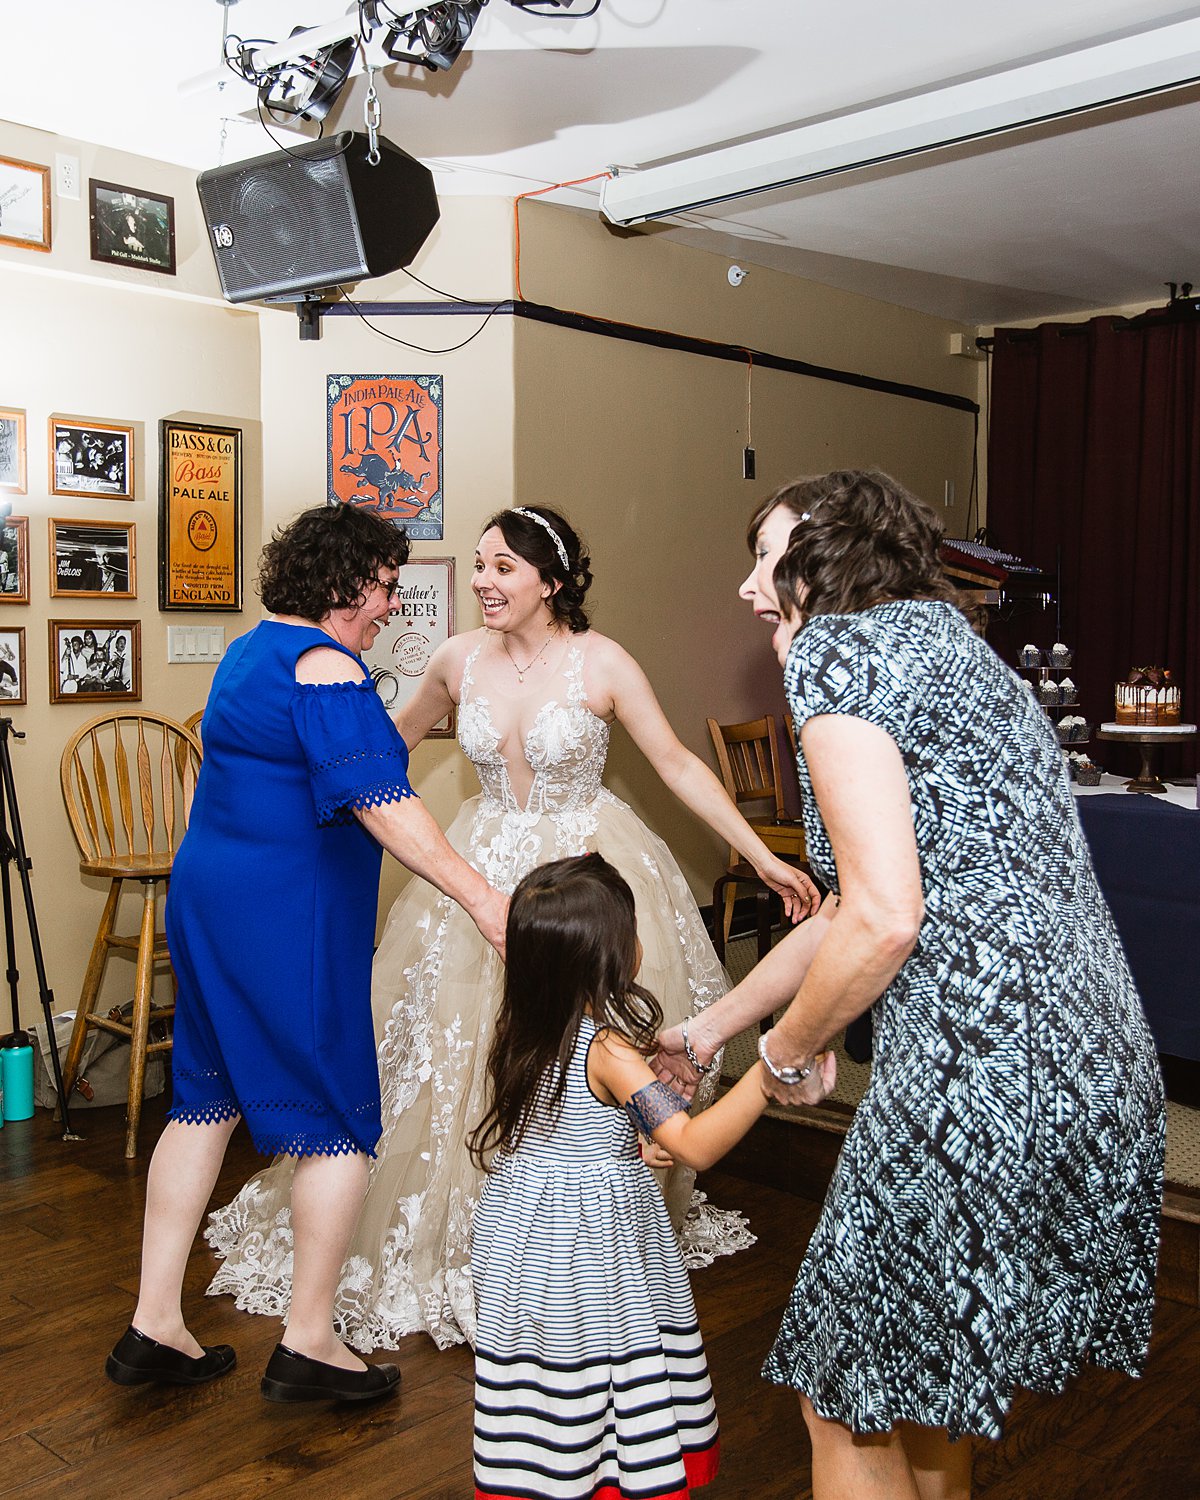 Bride dancing with her mother and guests at her wedding reception at the Weatherford Hotel in Flagstaff Arizona by wedding photographers PMA Photography.